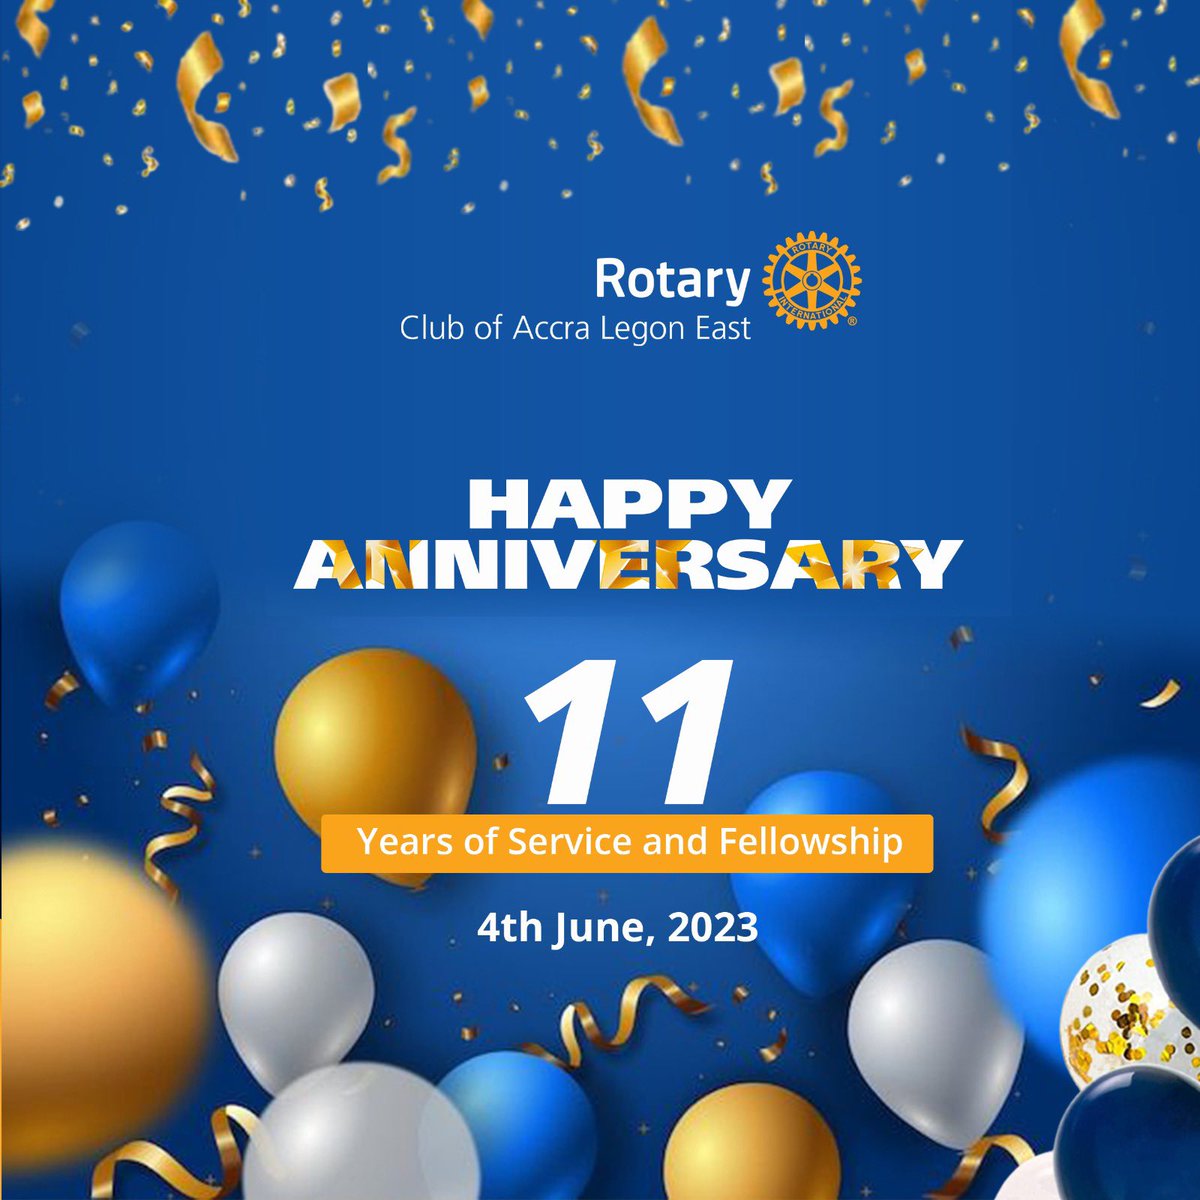 Happy Anniversary to us 🎉🎉🎊🎈🎈🎈
It’s been 11 years of service to humanity and doing good in the world. 
We are grateful to all partners in service who have been on  this journey with us from day one.. You are all jolly good fellows 🙌🏾👏🏾👏🏾👏🏾
#rotaryale
#ServeToChangeLives